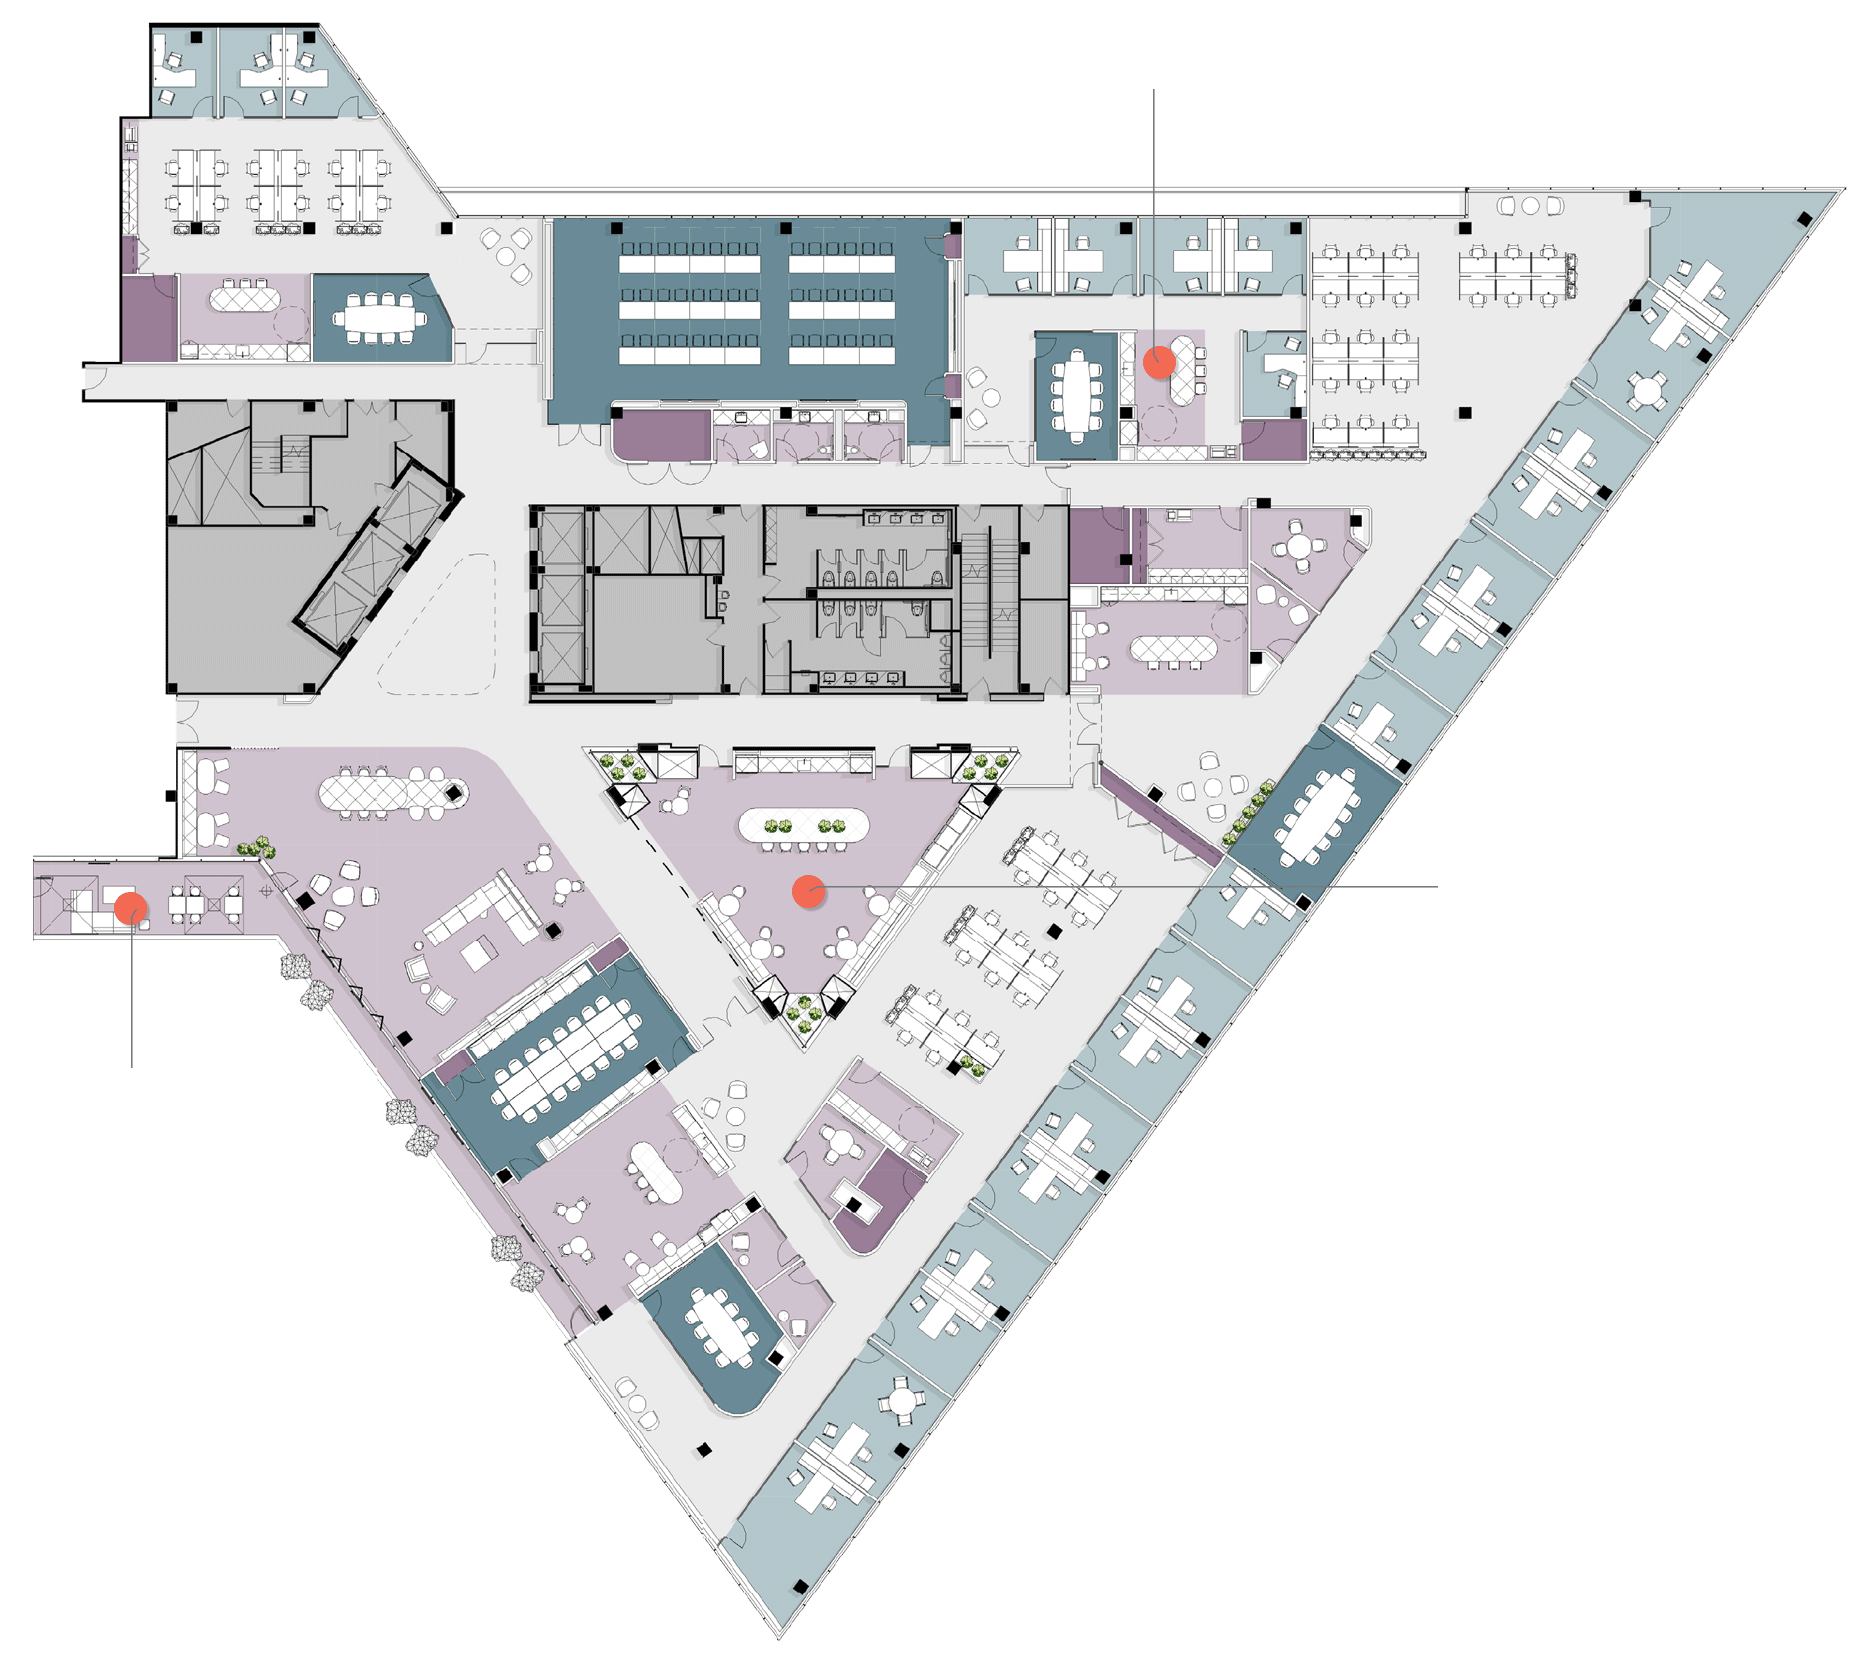 A floorplan showing communal areas as part of the town hall shared space concept